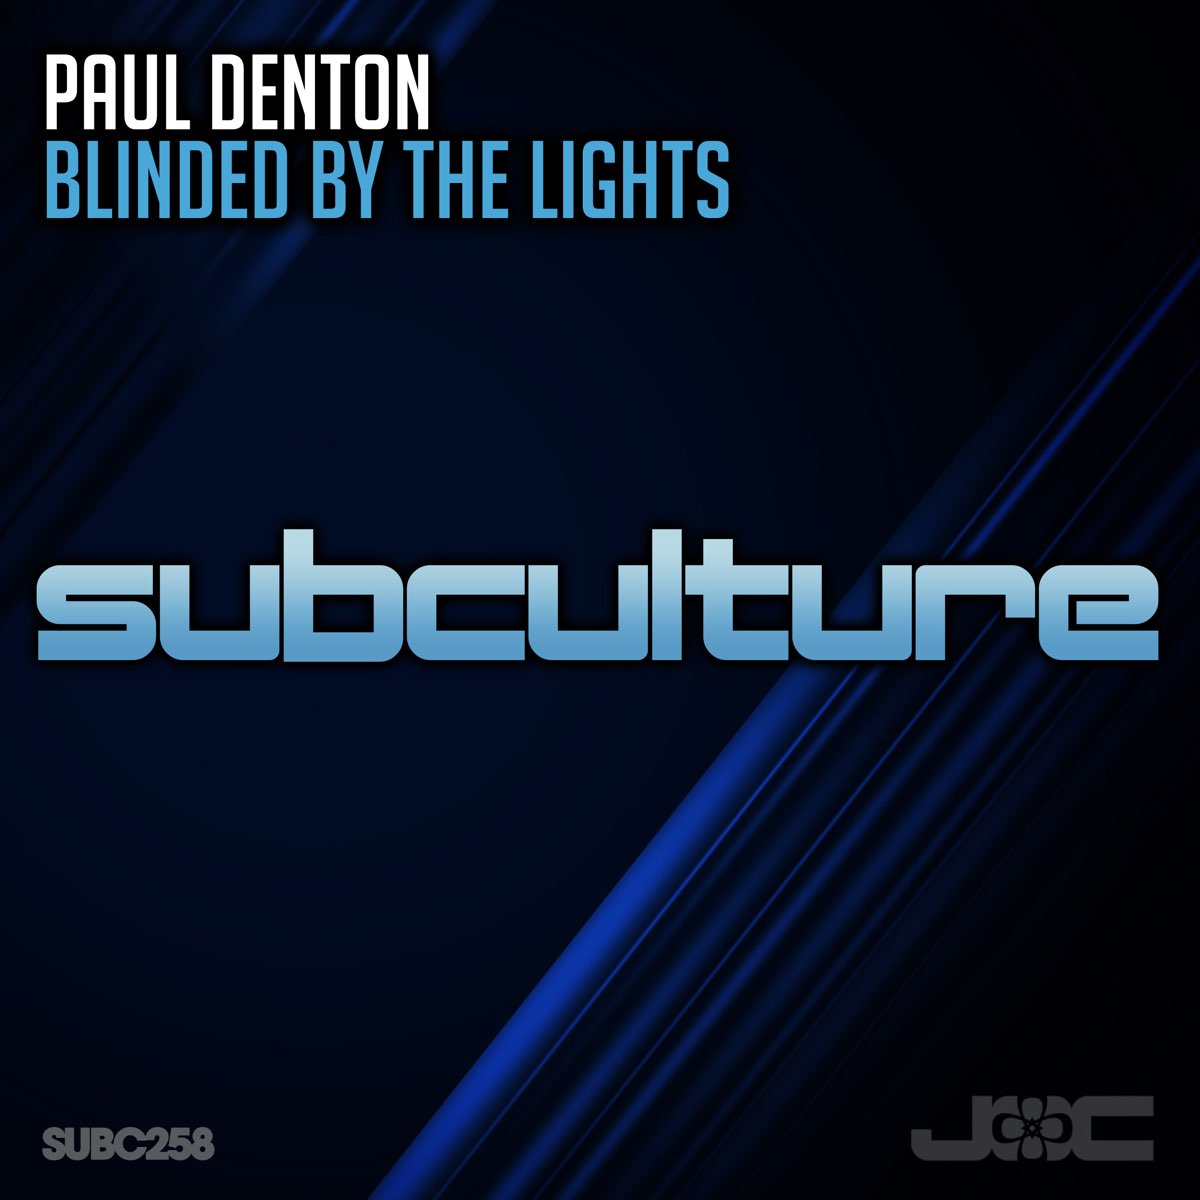 Paul light. Paul Denton. Paul Denton DJ. Paul Denton - Blinded by the Lights (Extended Mix). Blinded by the Light.